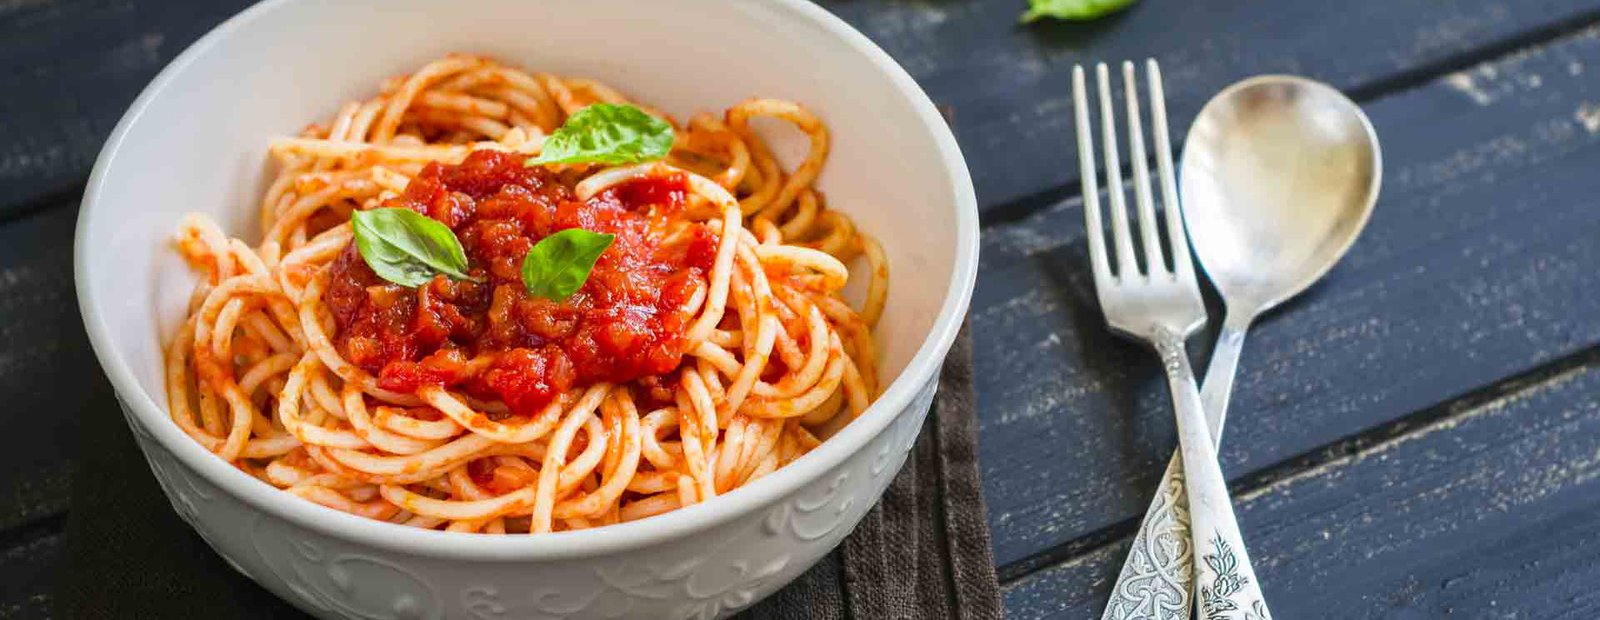 Millennials and Designers love pasta… with tomato sauce